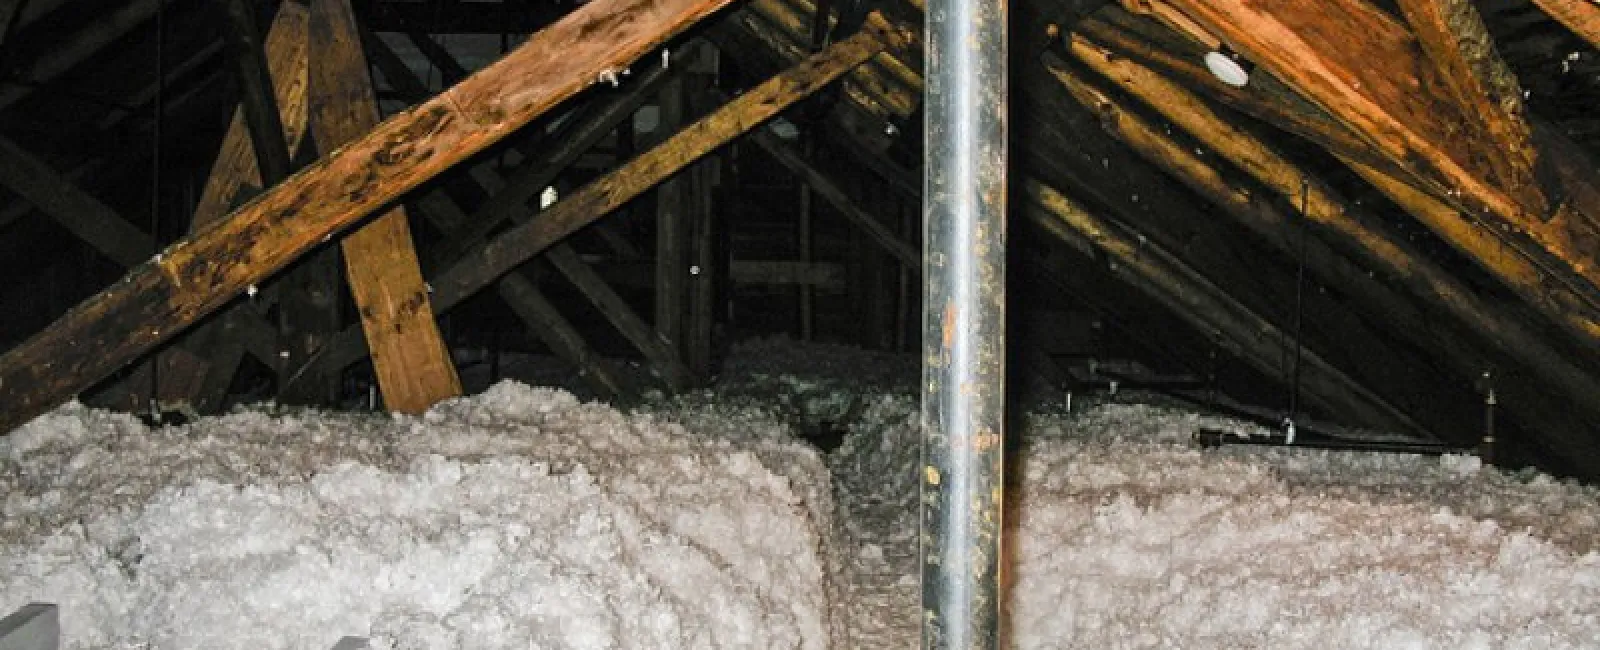 R Value: A term you need to know when upgrading attic insulation